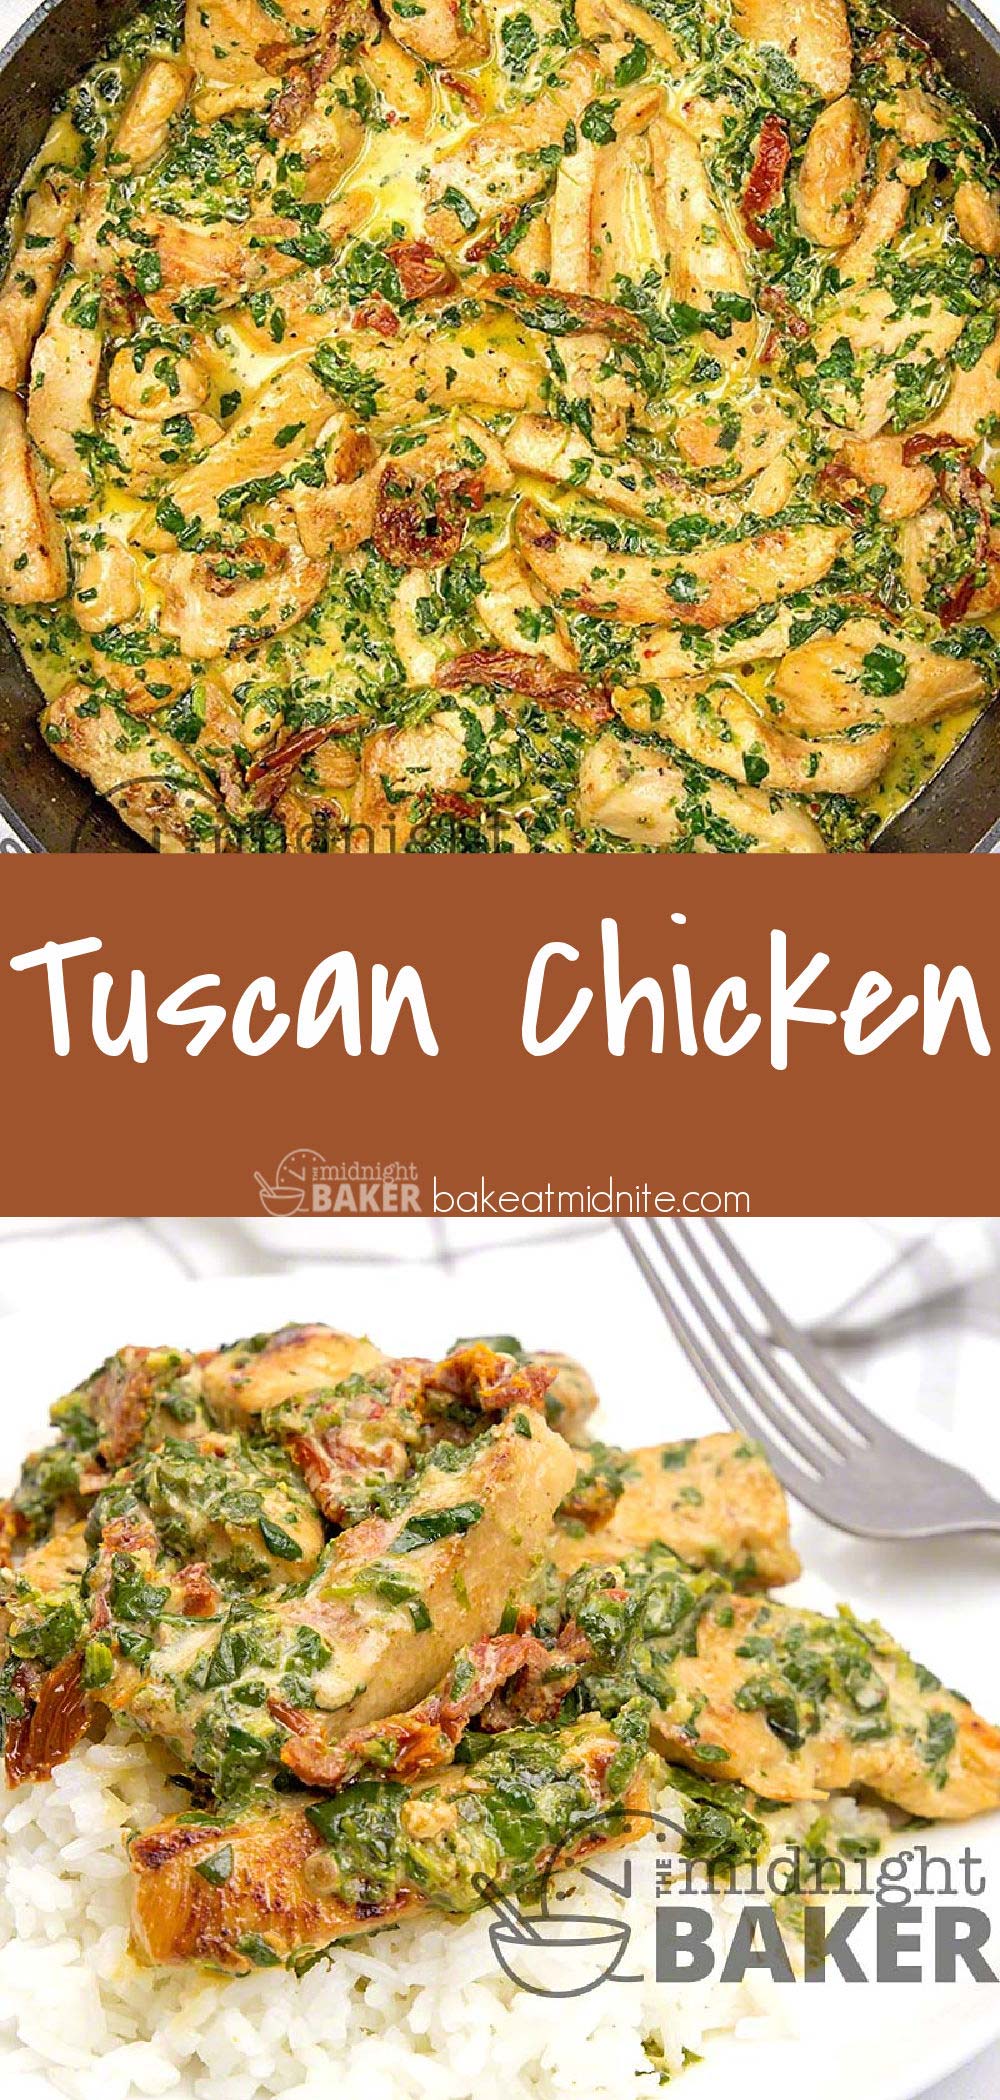 Tuscan chicken is real food that takes little time.